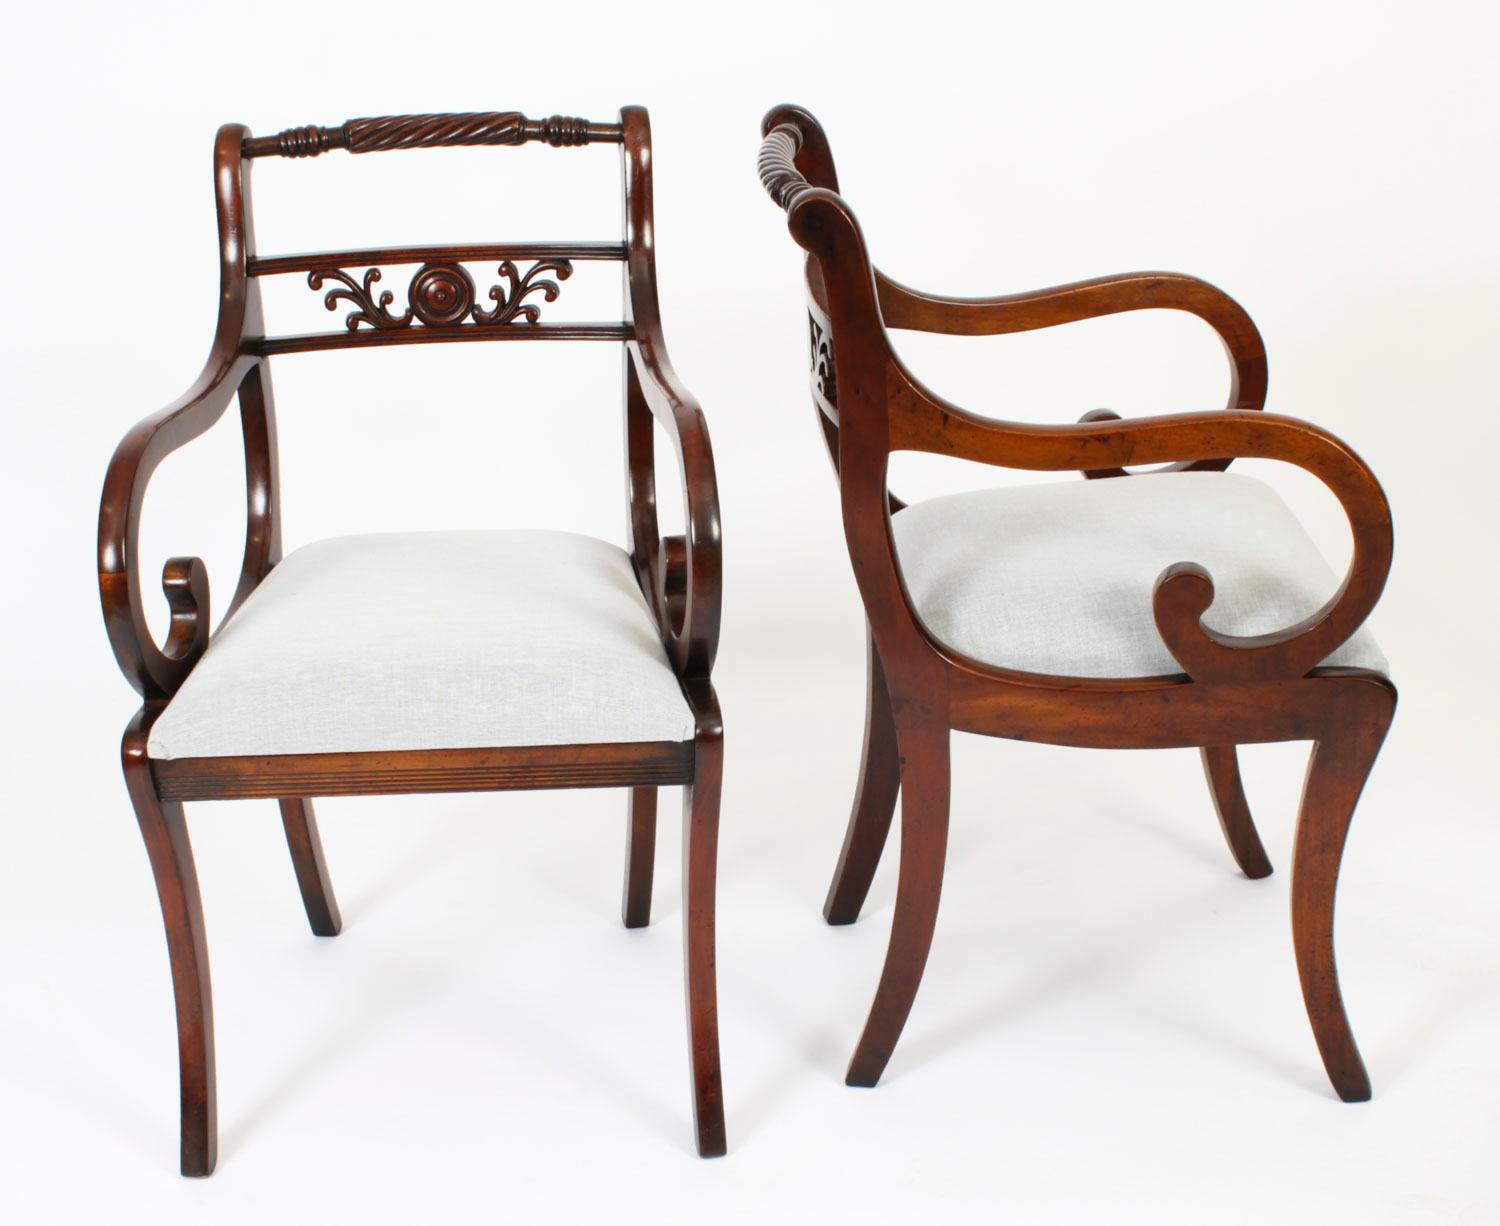 An absolutely fantastic Vintage pair of Regency Revival armchairs dating from the second half of the  20th Century.

These chairs have been masterfully crafted in beautiful solid flame mahogany throughout and the finish and attention to detail on